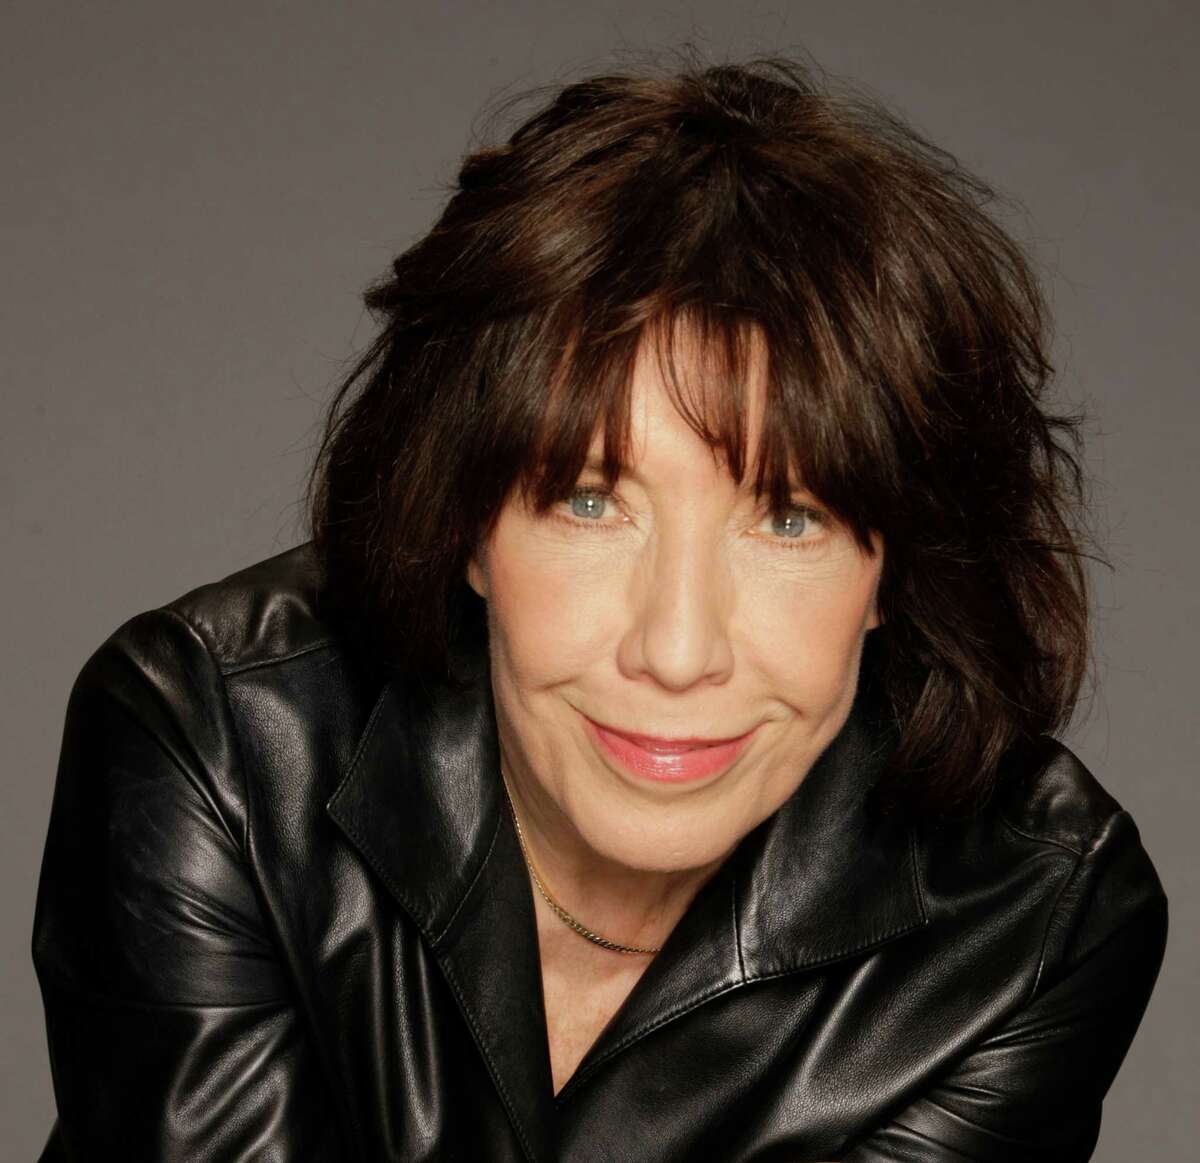 Lily Tomlin will come to Houston as a part of SPA's 2012-13 season.